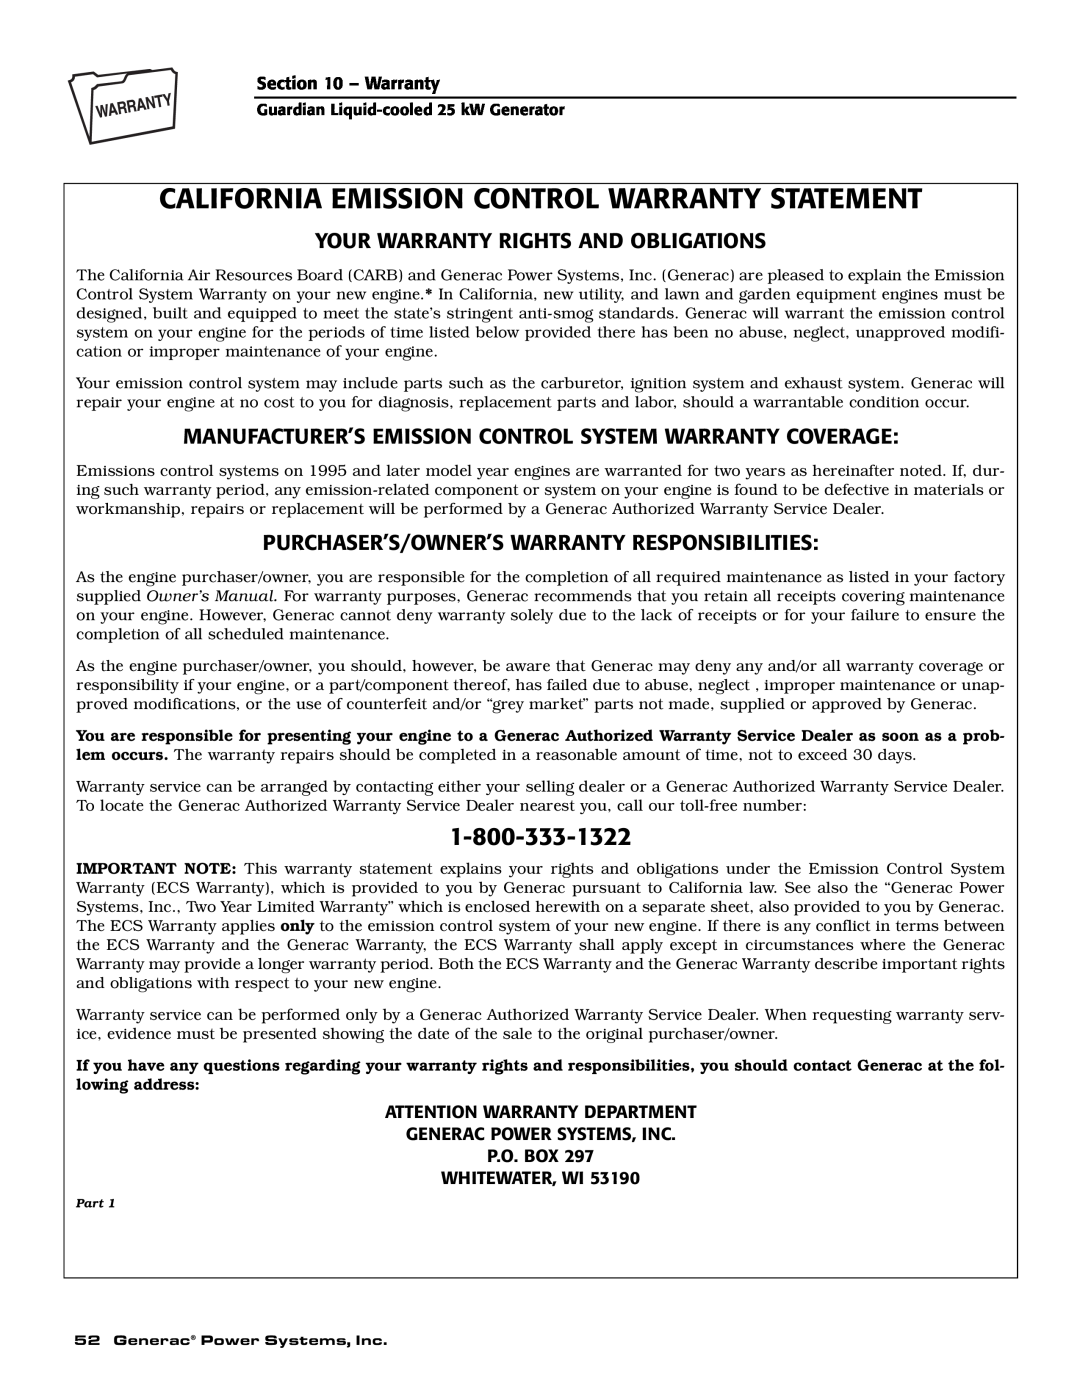 Generac Power Systems 005053-1 Your Warranty Rights And Obligations, Purchaser’S/Owner’S Warranty Responsibilities 